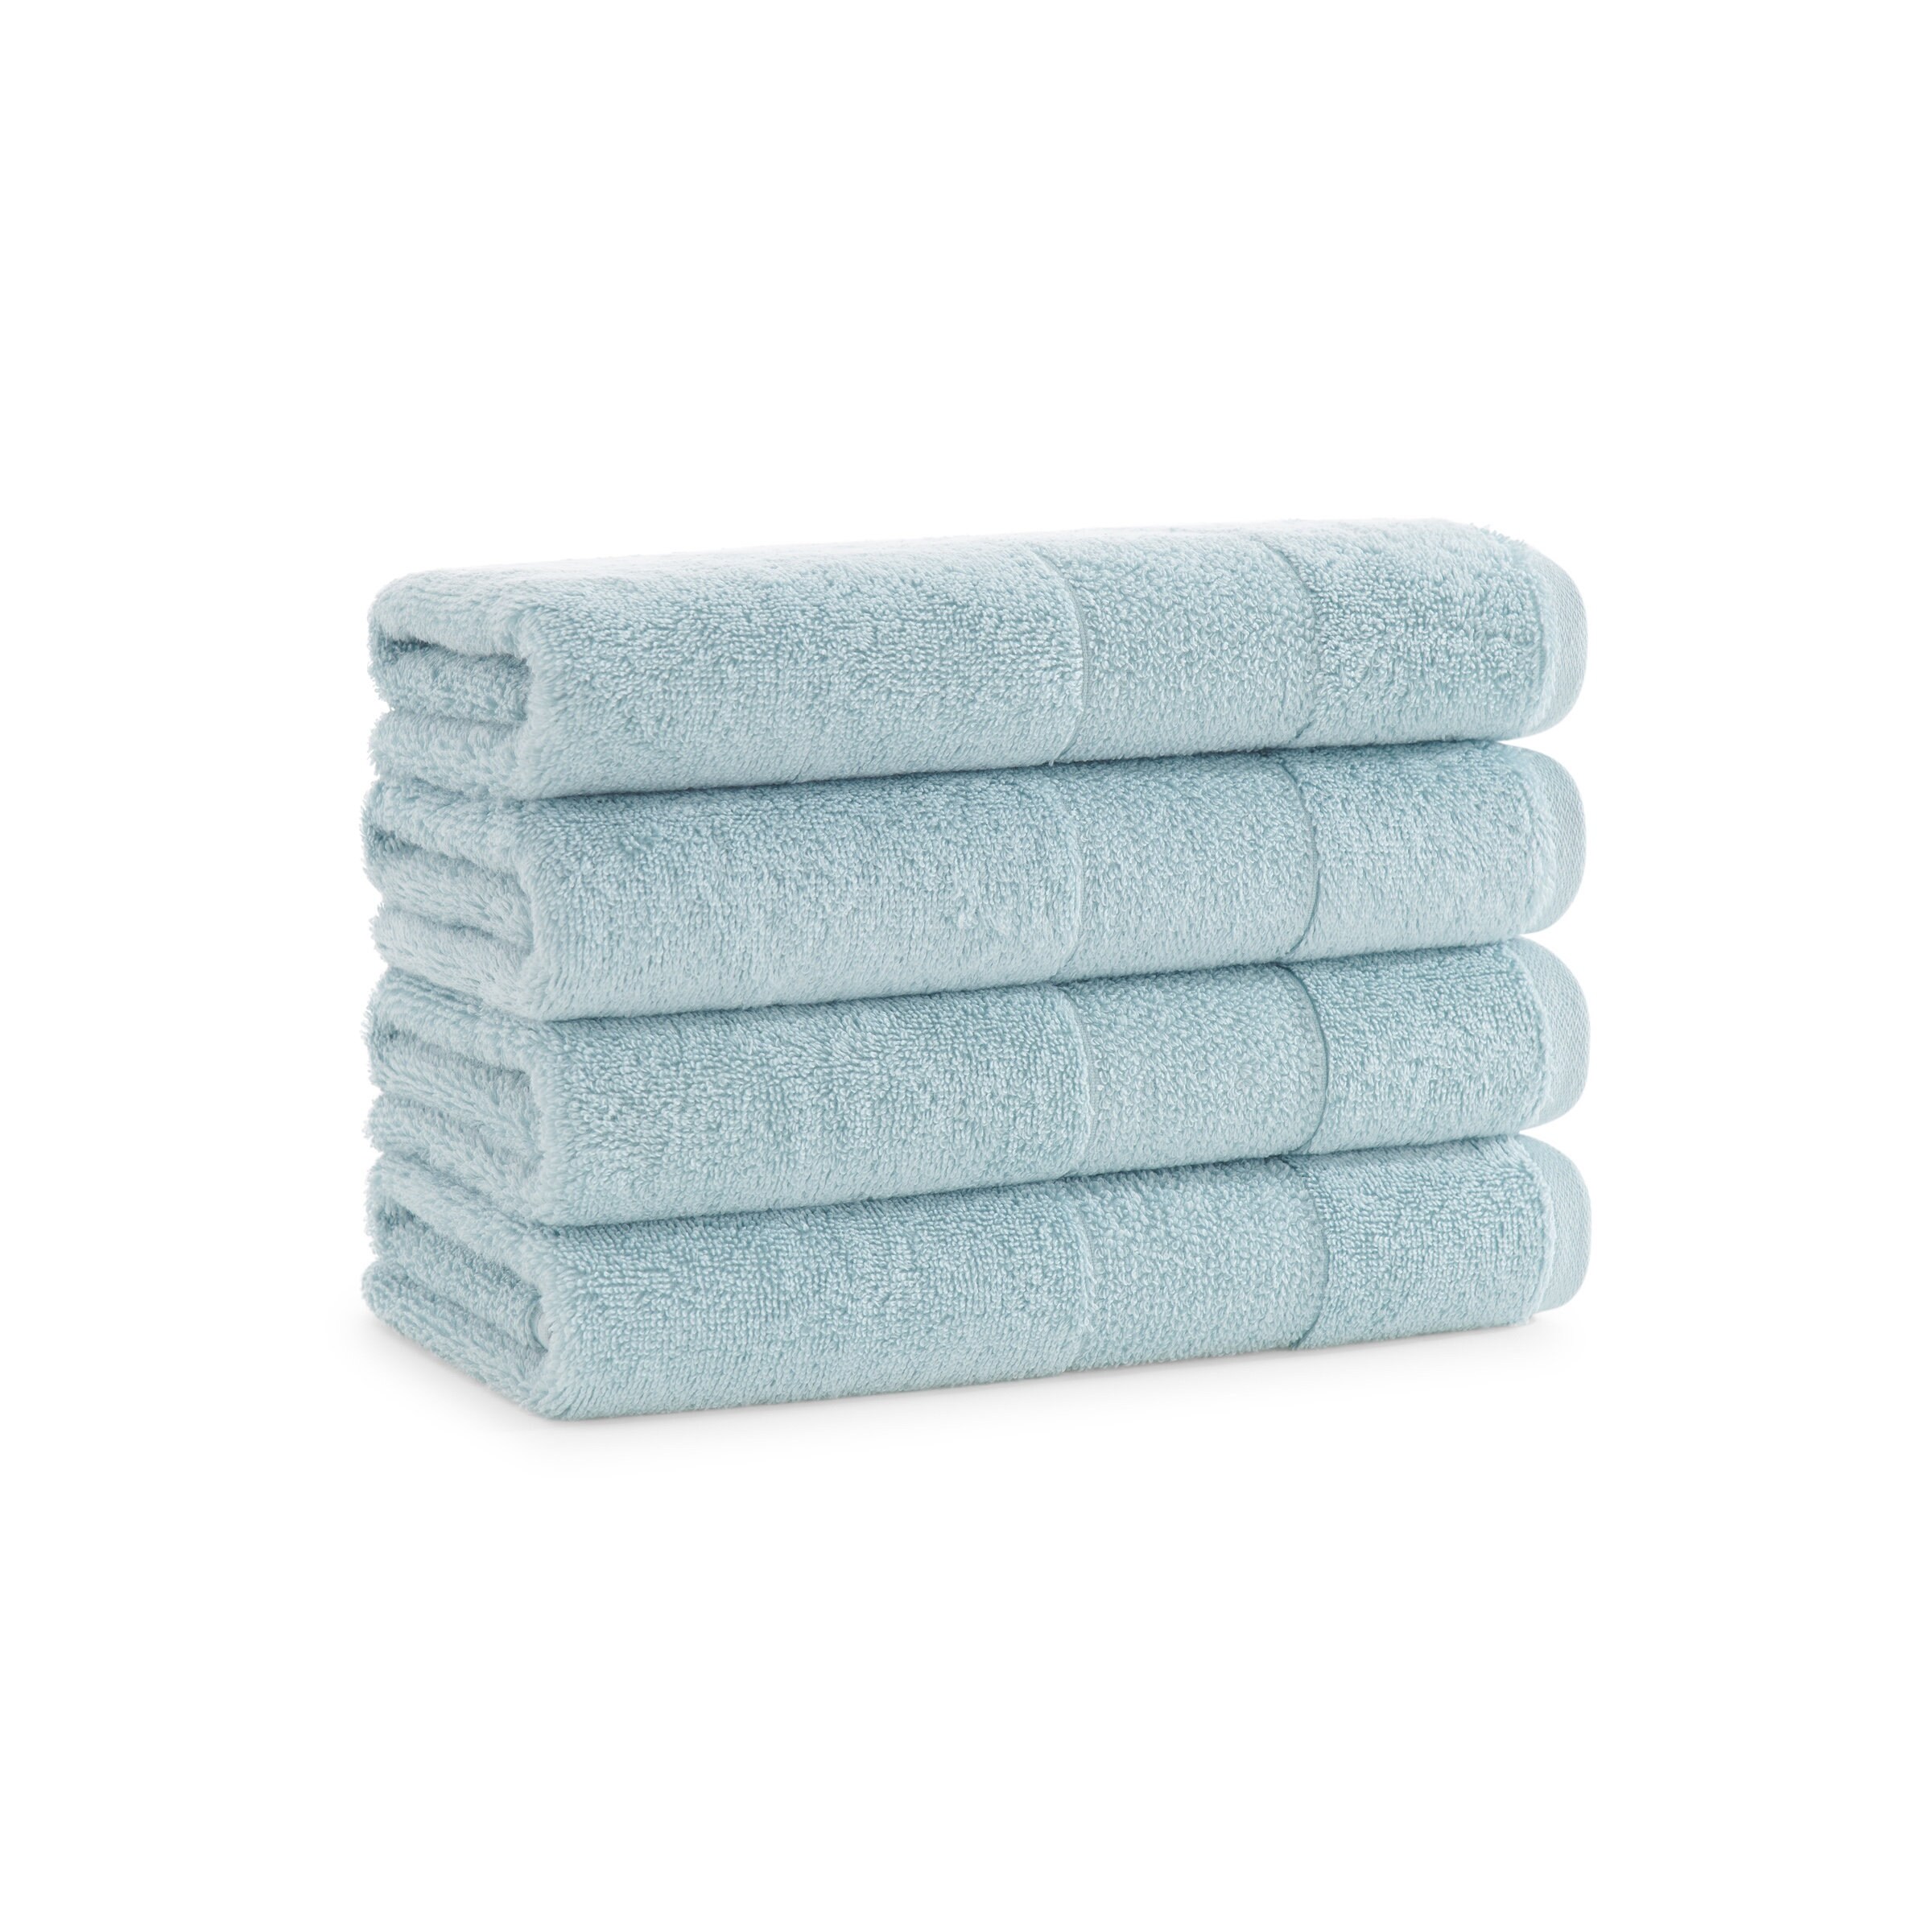 Aston and Arden Luxury Turkish Bath Towels, 2-Pack, 600 GSM, Extra